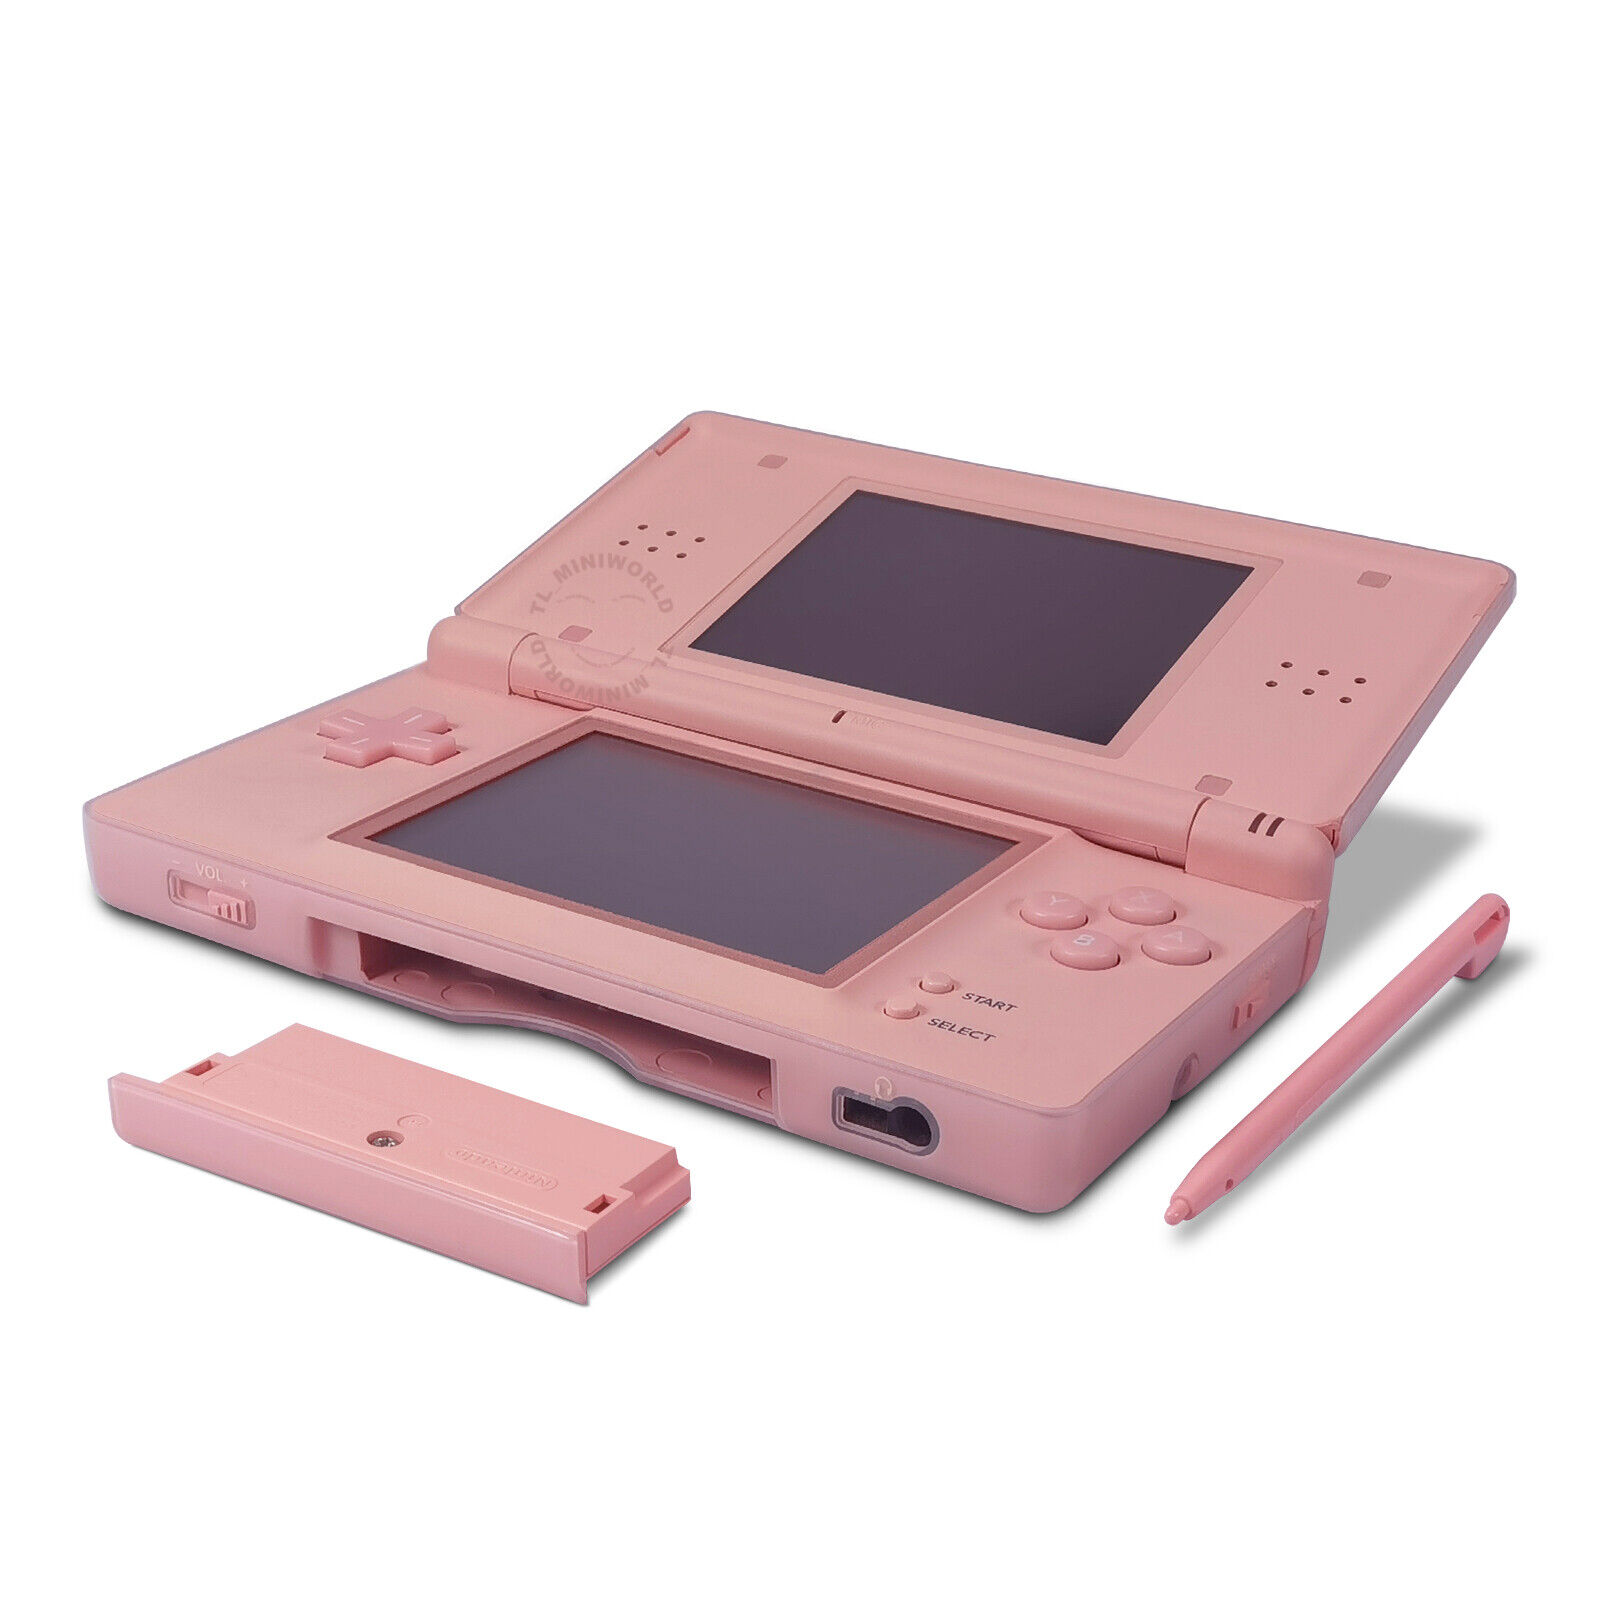 Nintendo DS Lite & Game boy Advance HandHeld Console System Coral Pink N  DSL GBA